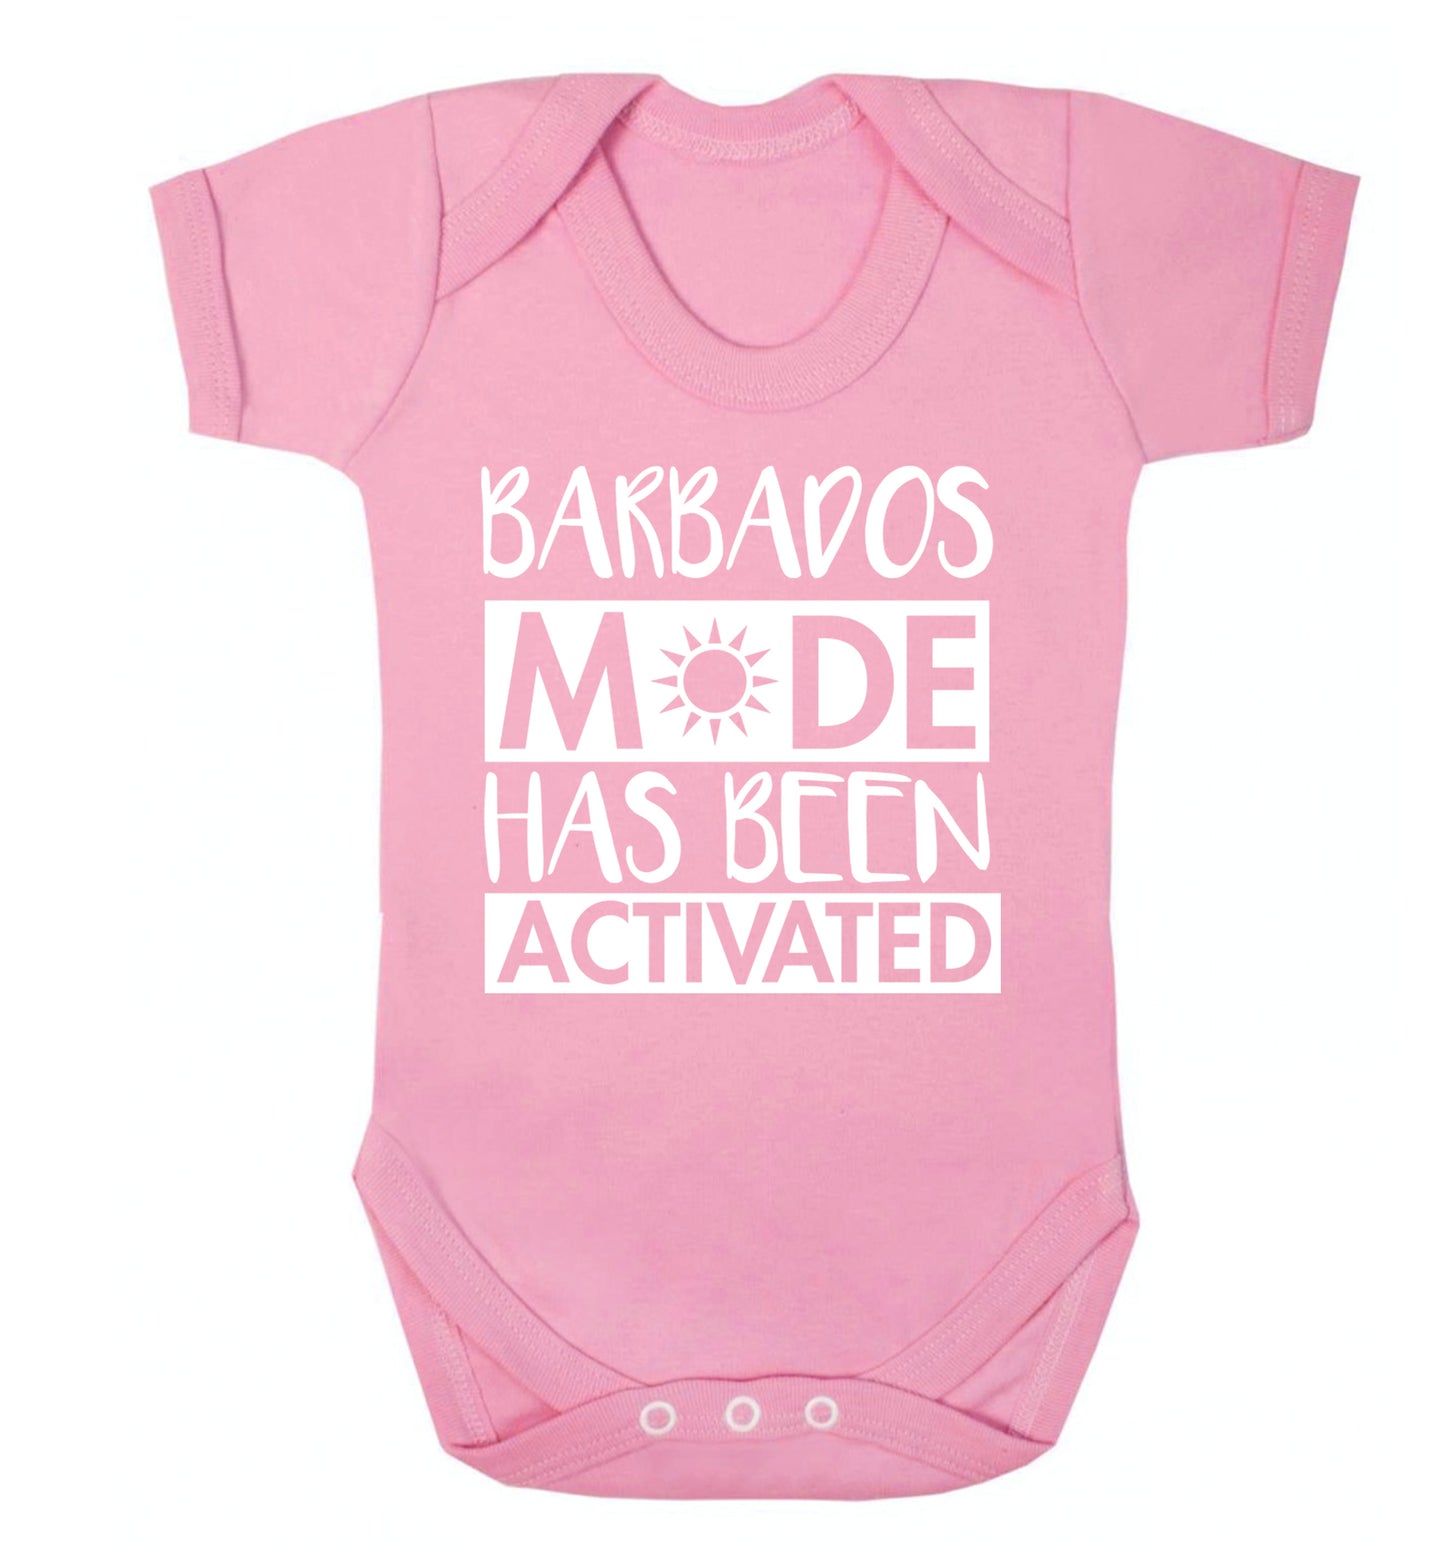 Barbados mode has been activated Baby Vest pale pink 18-24 months